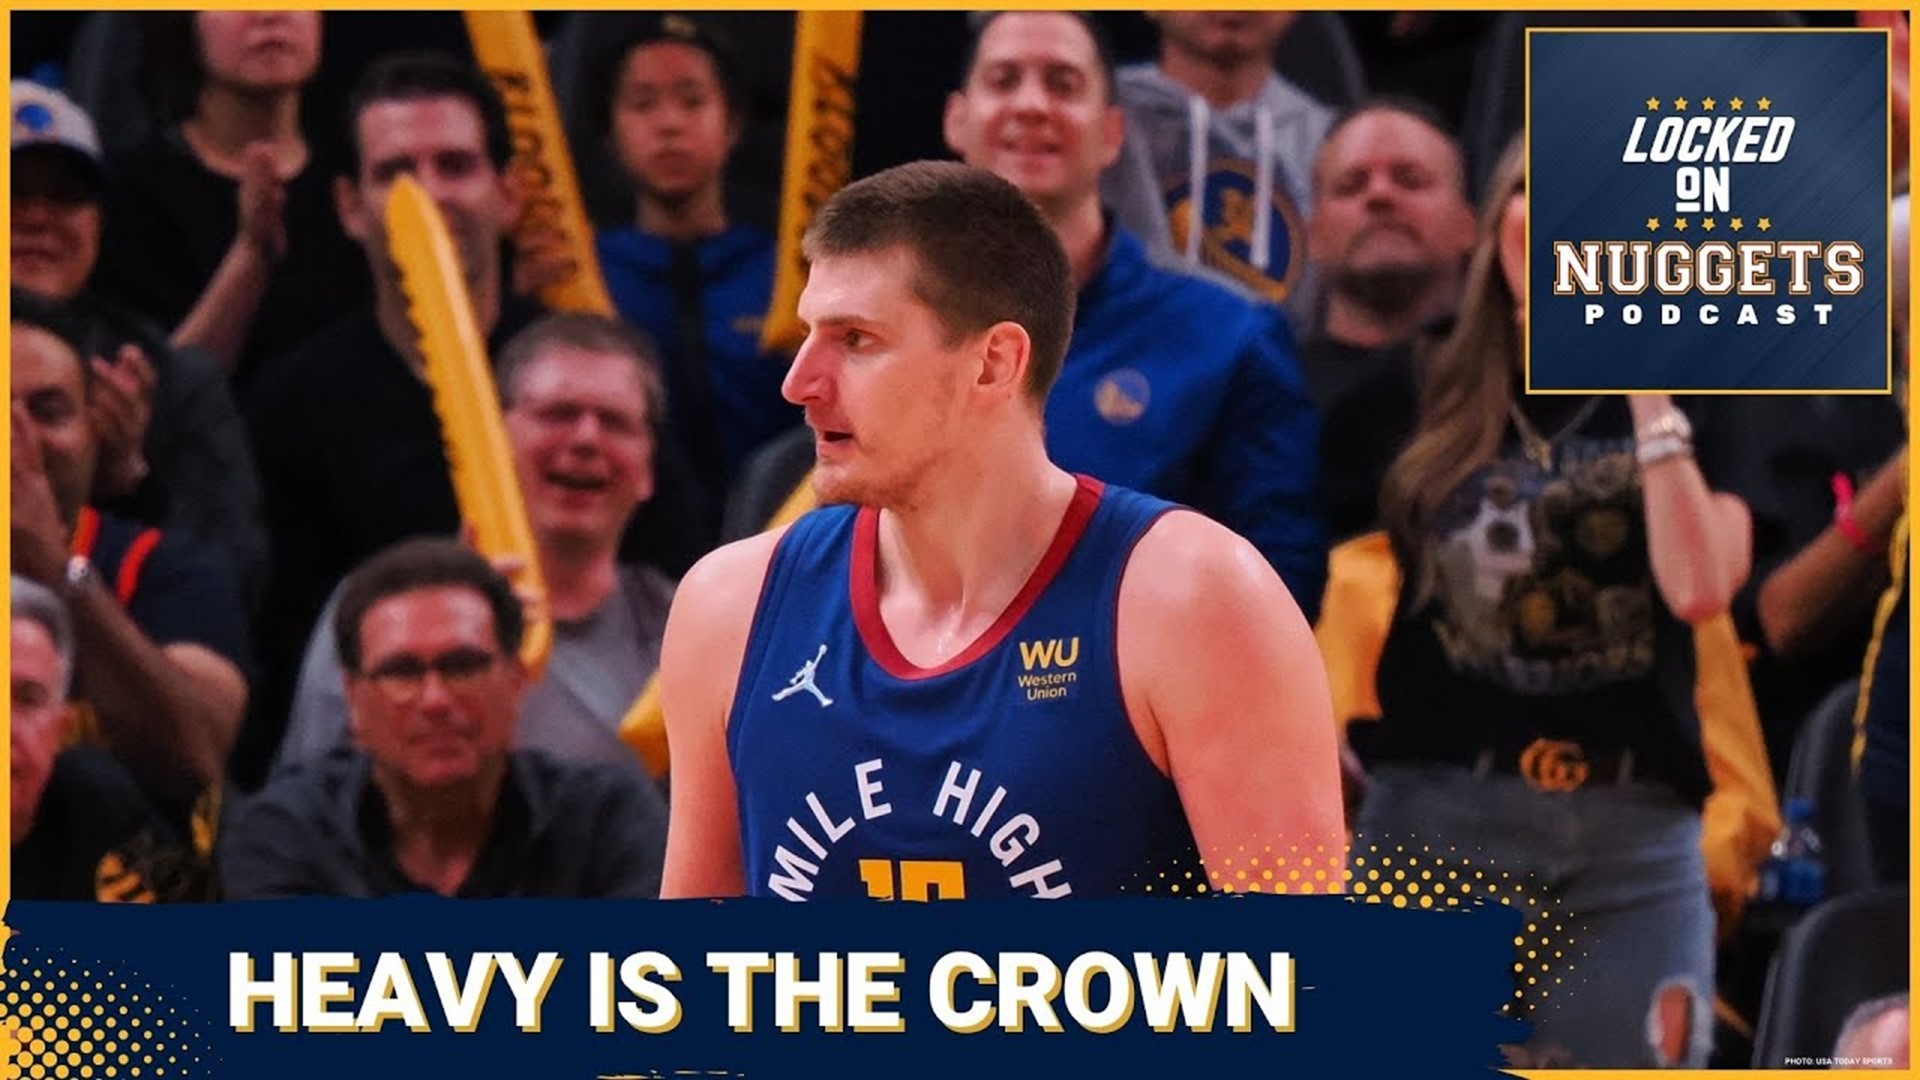 Nikola Jokic gets ejected in a game his team needed to win (and won). Can we criticize a player who has given and continues to give so much?